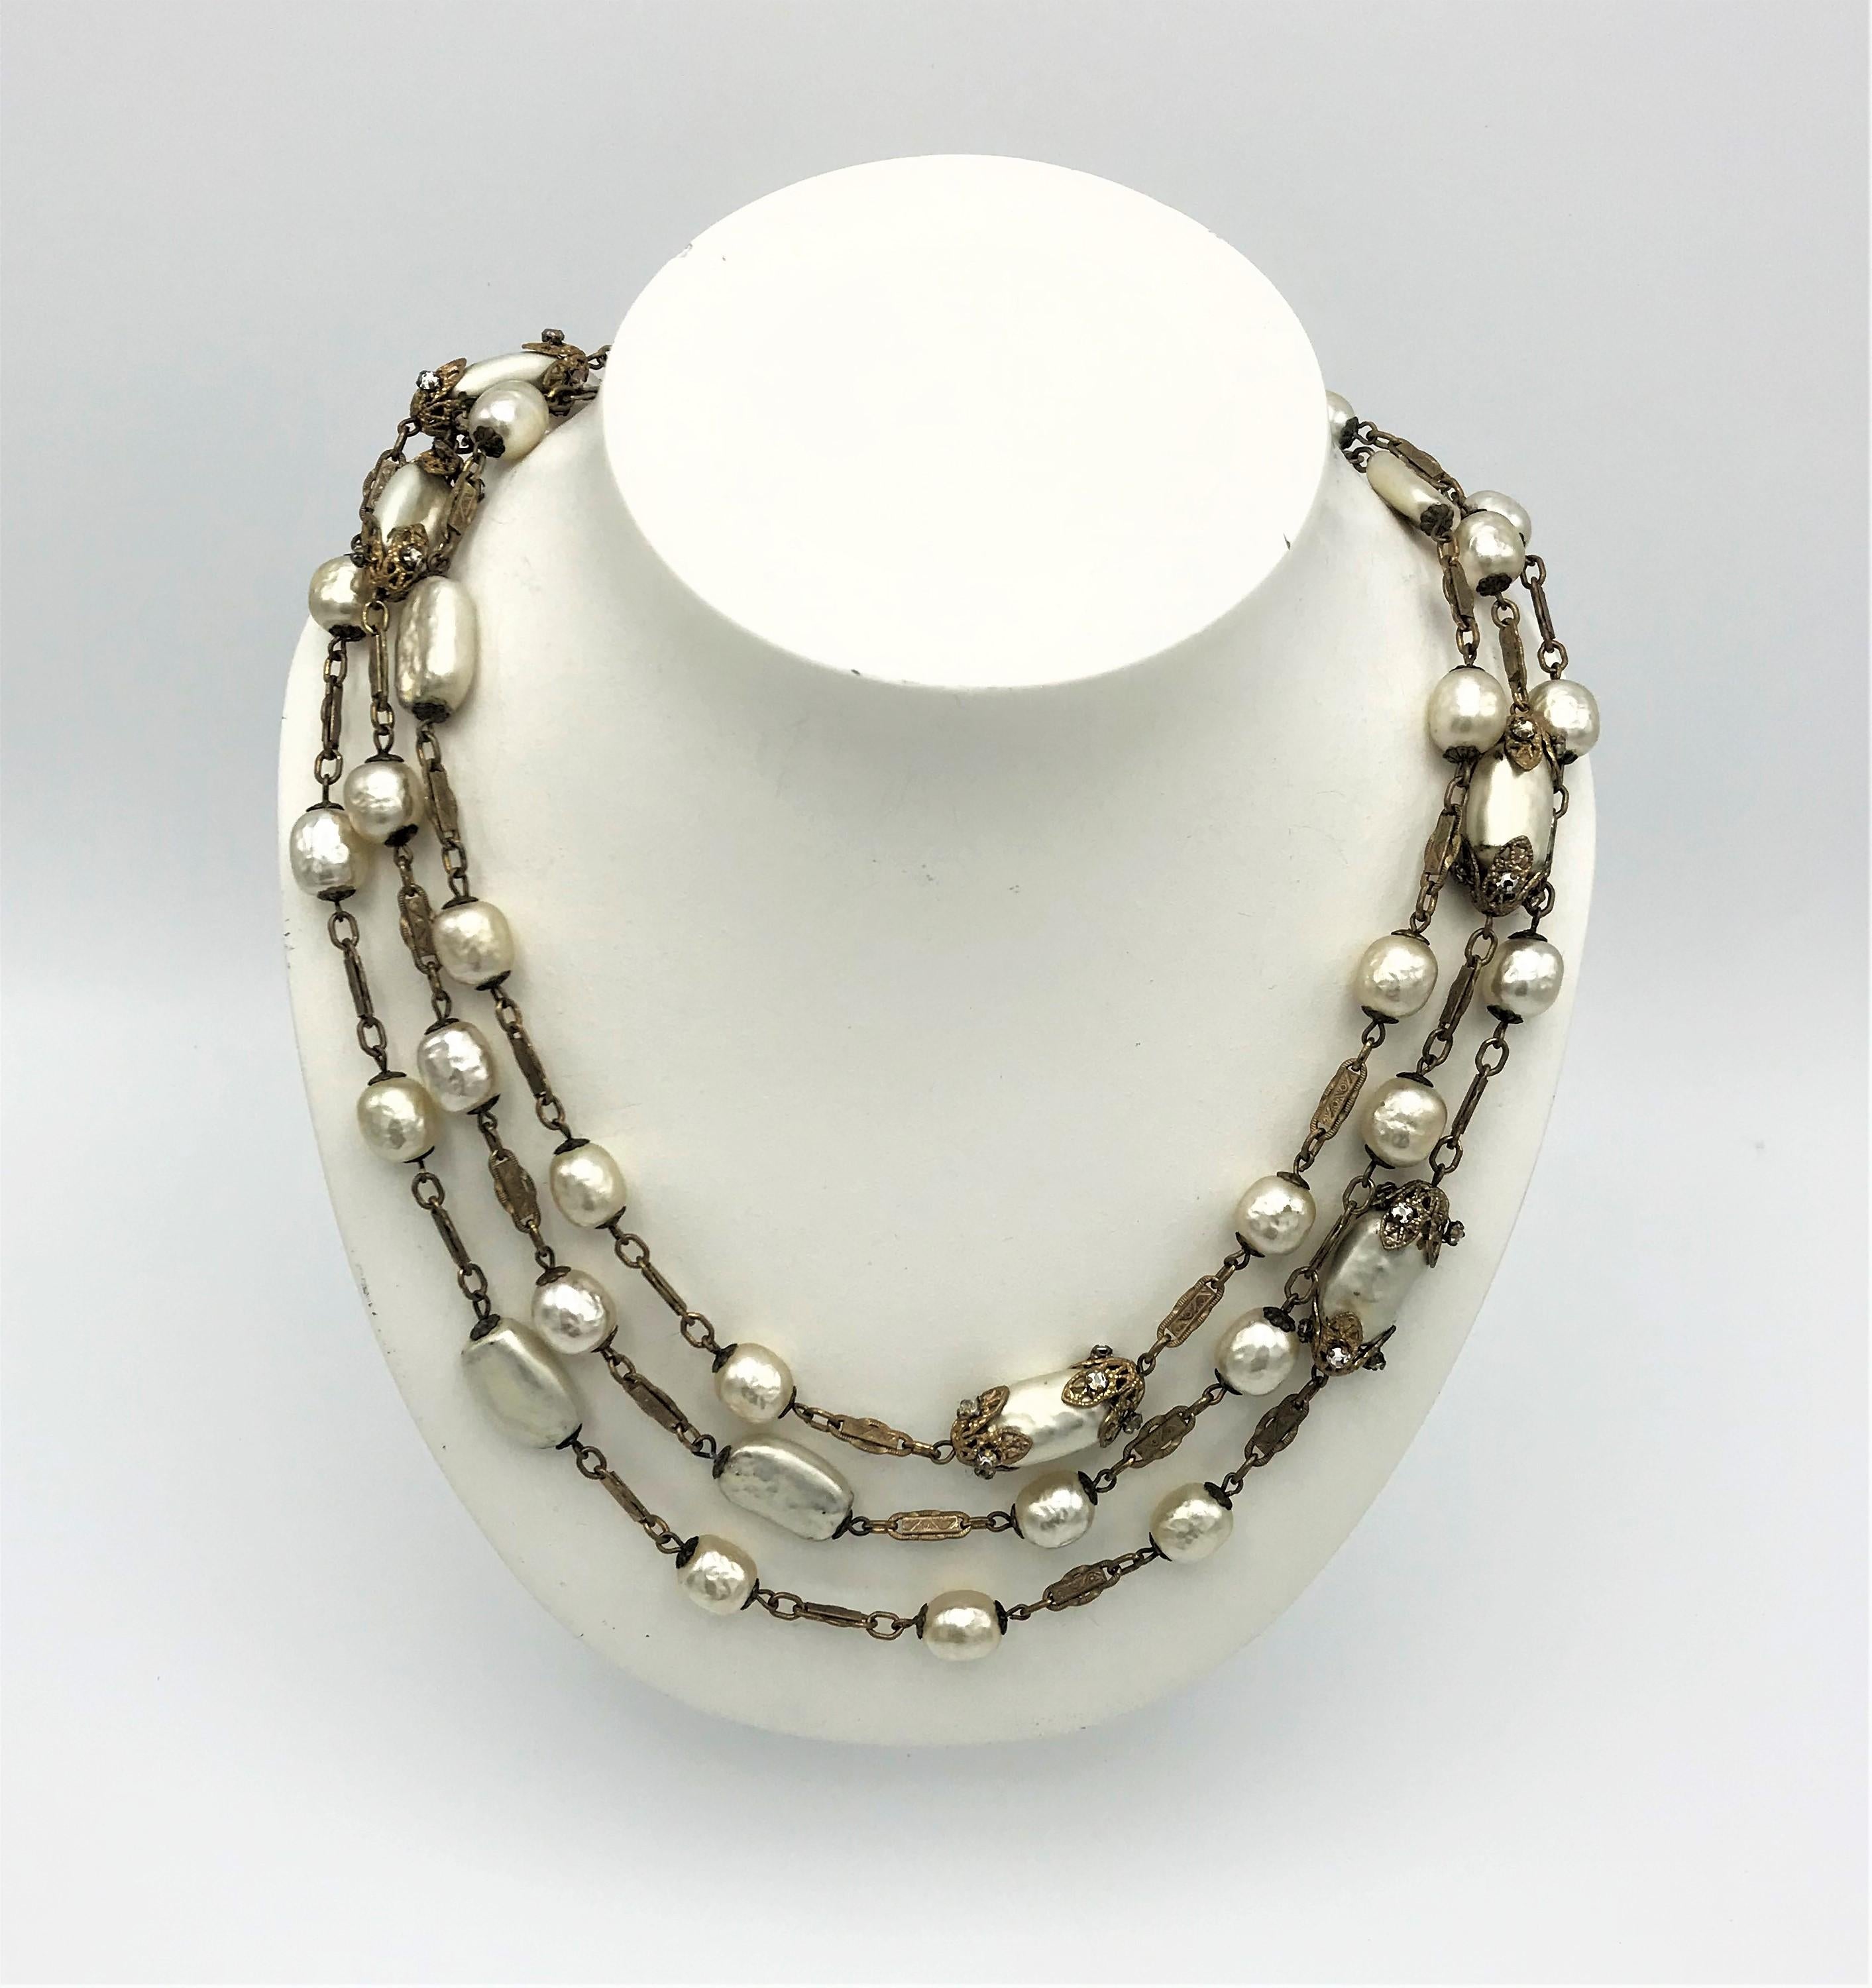 Exquisite and long 1950s Miriam Haskell necklace with different aux barock pearls.  Round, oval flat and oval bordered with fine leaves and rhinestone accents. The necklace has a spring ring clasp and next to it the signature plaque MIRIAM HASKELL.